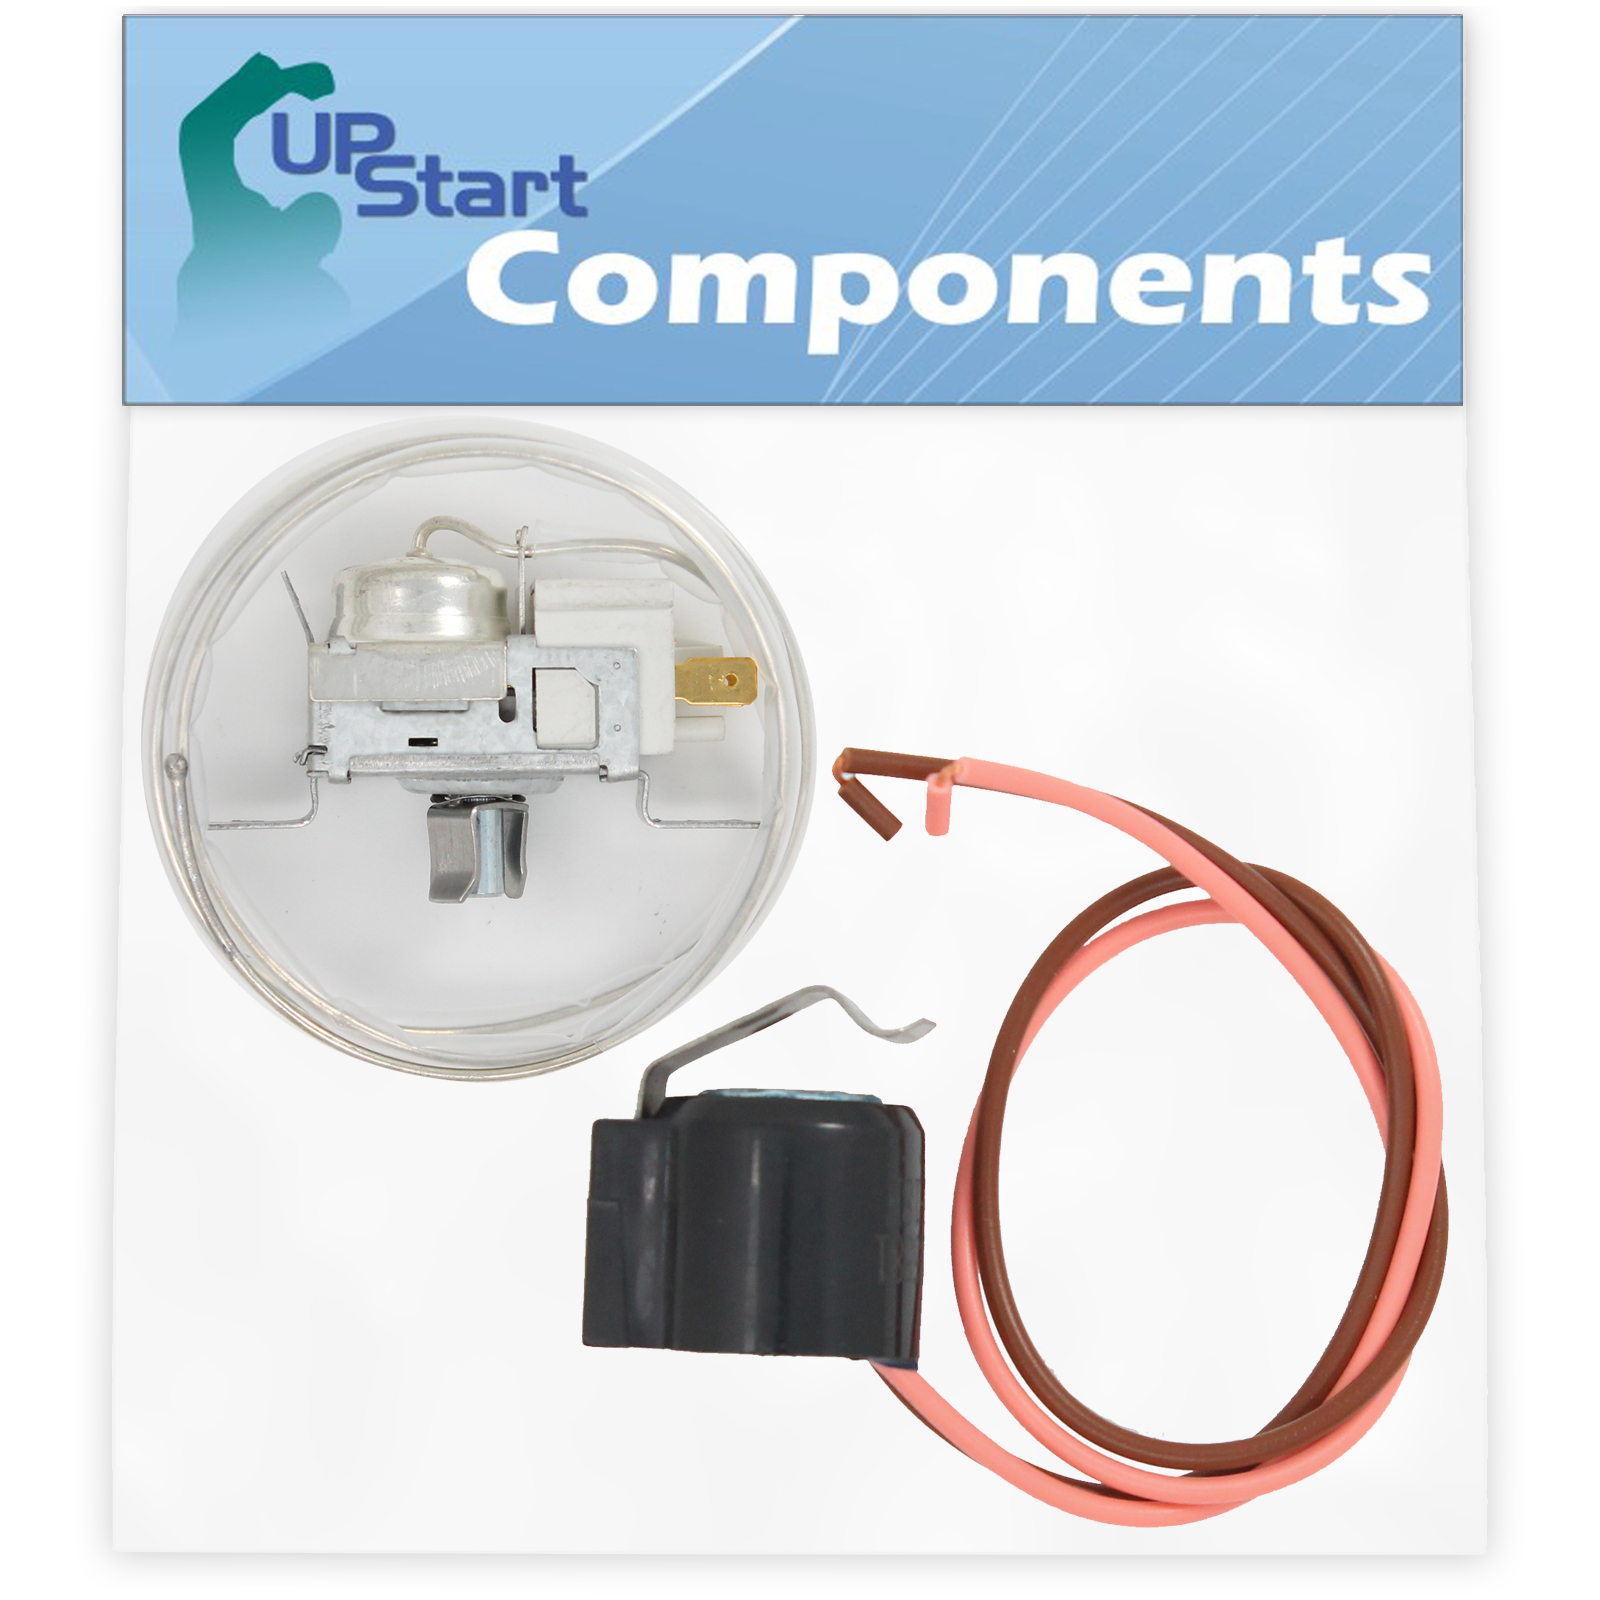 UpStart Components 2198202 Cold Control Thermostat & W10225581 Defrost Thermostat Replacement for Whirlpool ED25PEXHW00 Refrigerator